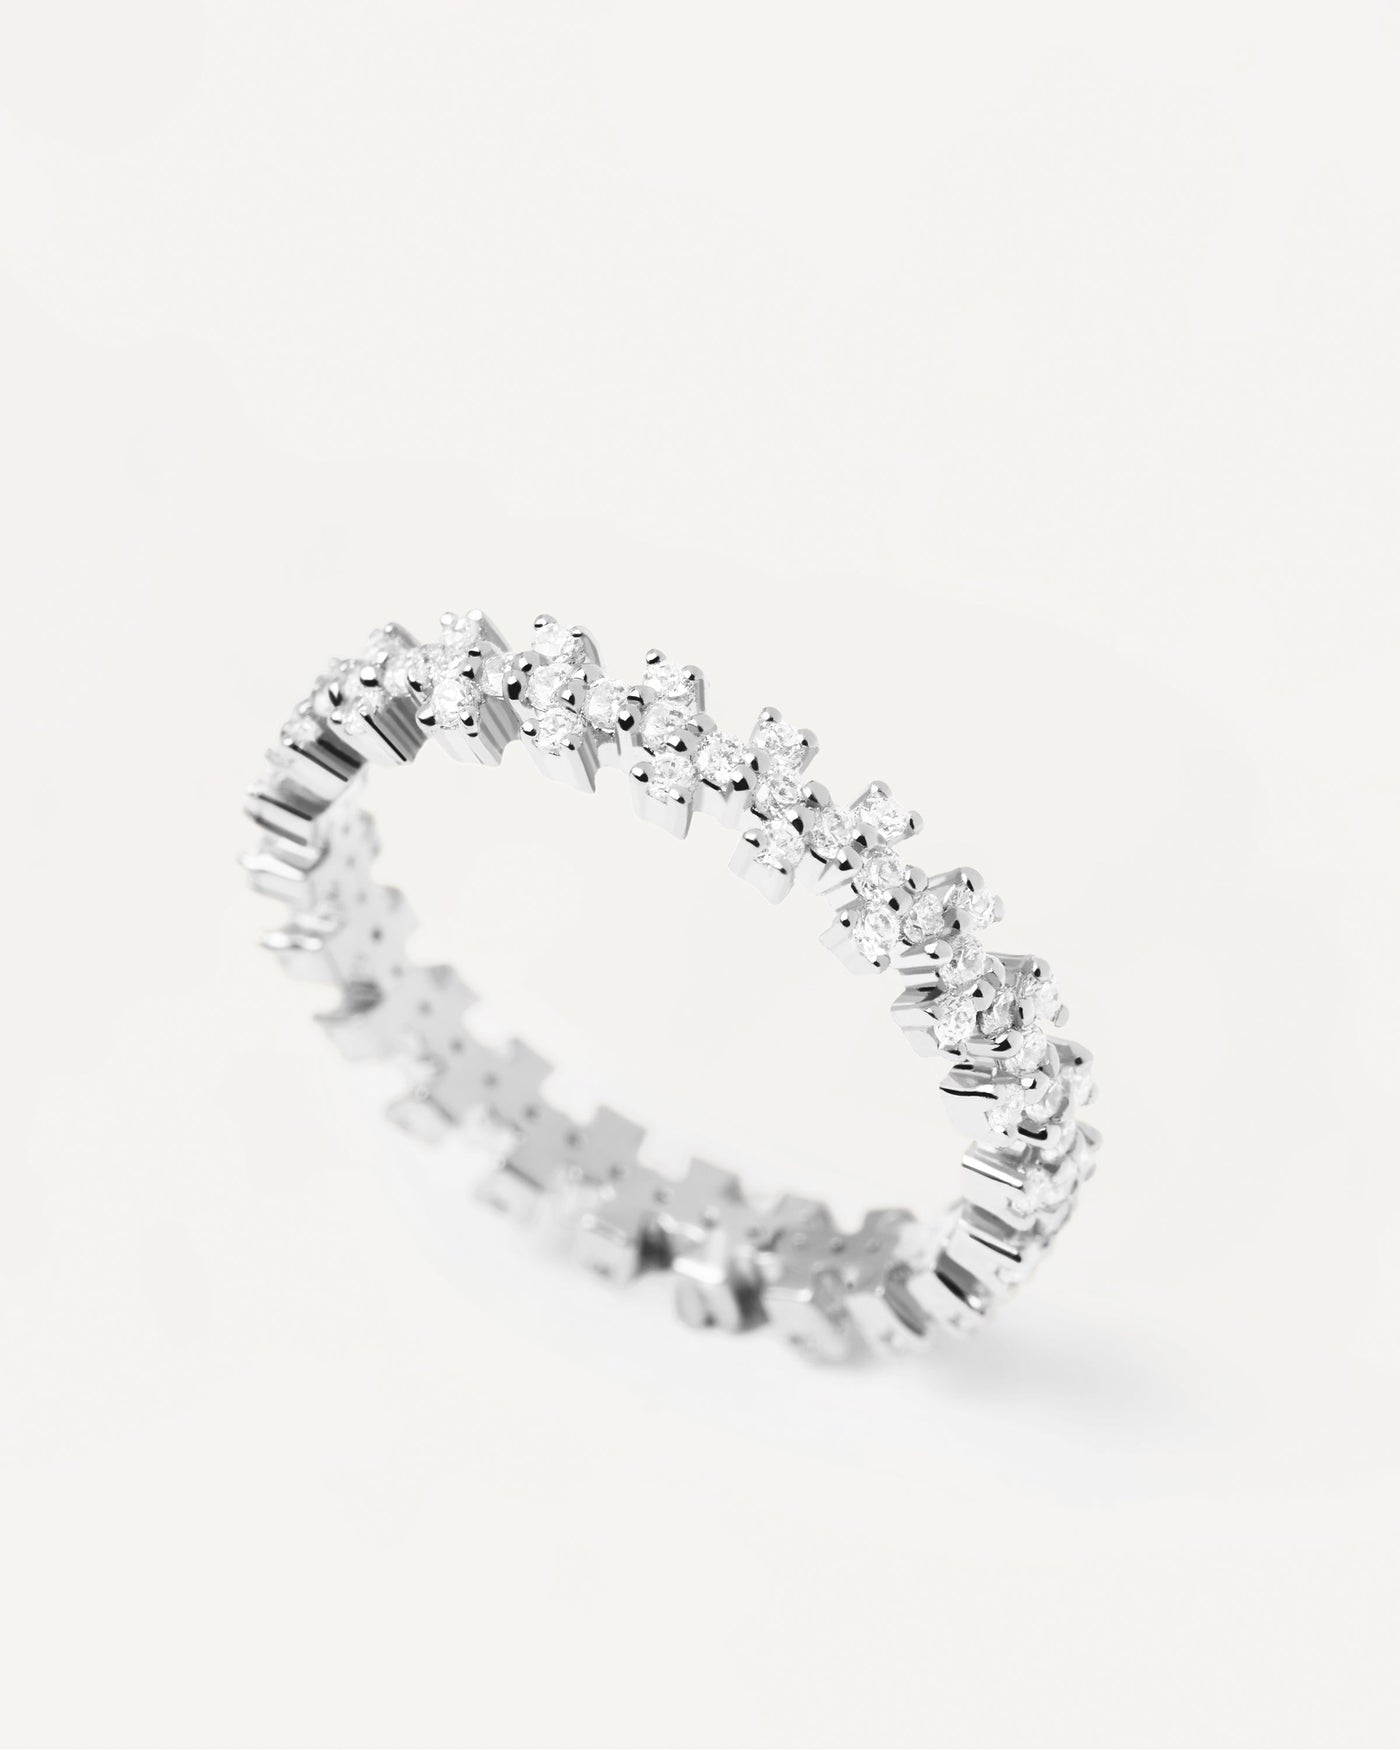 2023 Selection | Crown Silver Ring. Sterling silver eternity ring with crown shape. Get the latest arrival from PDPAOLA. Place your order safely and get this Best Seller. Free Shipping.